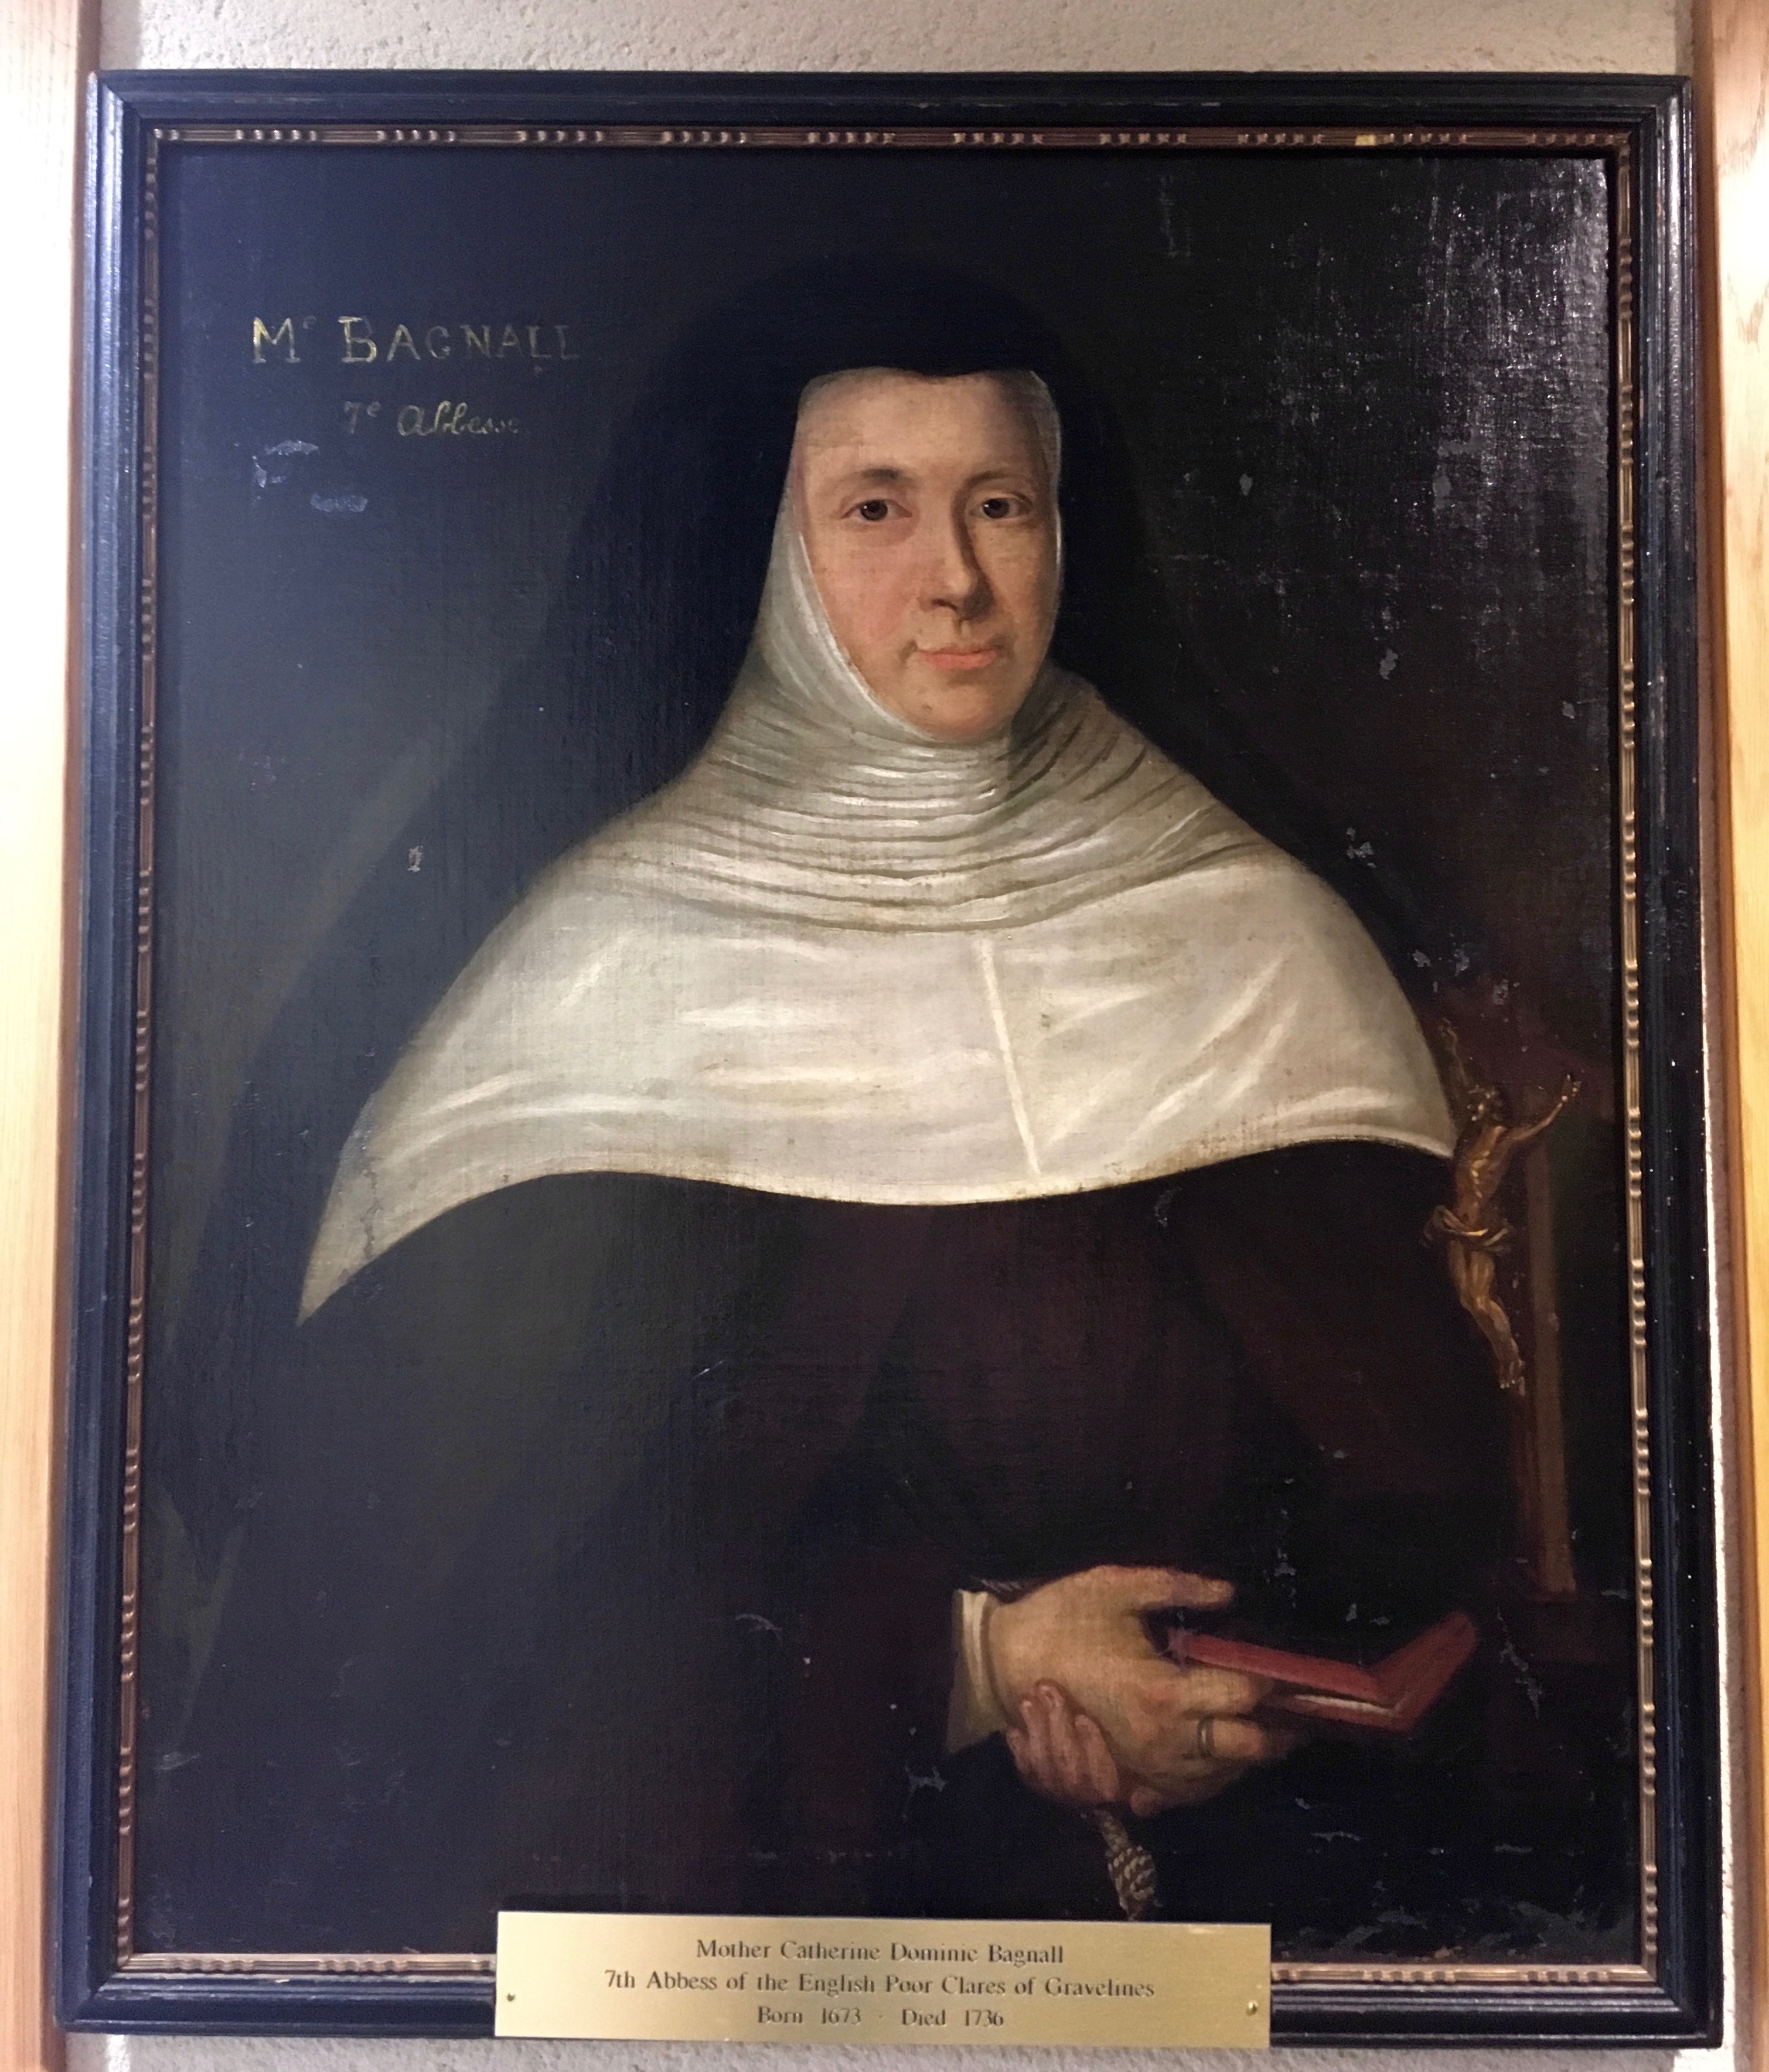 Portrait of Abbess Catherine Dominic Bagnall (1673–1736), English Poor Clares. Image taken by the author